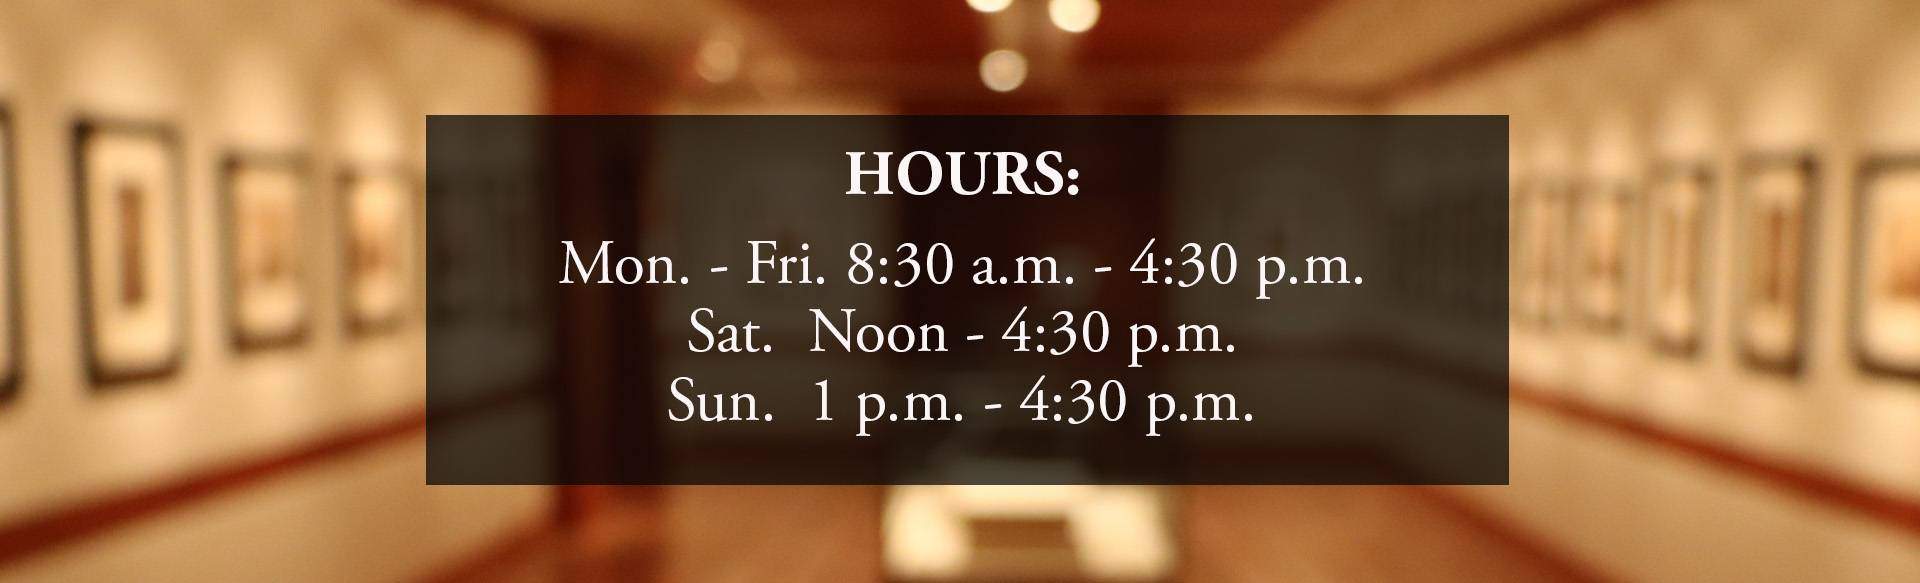 Wittliff Hours: Monday through Friday 8:30 a.m. till 4:30 p.m. Saturday noon till 4:30 p.m. Sunday 1 p.m. til 4:30 p.m.